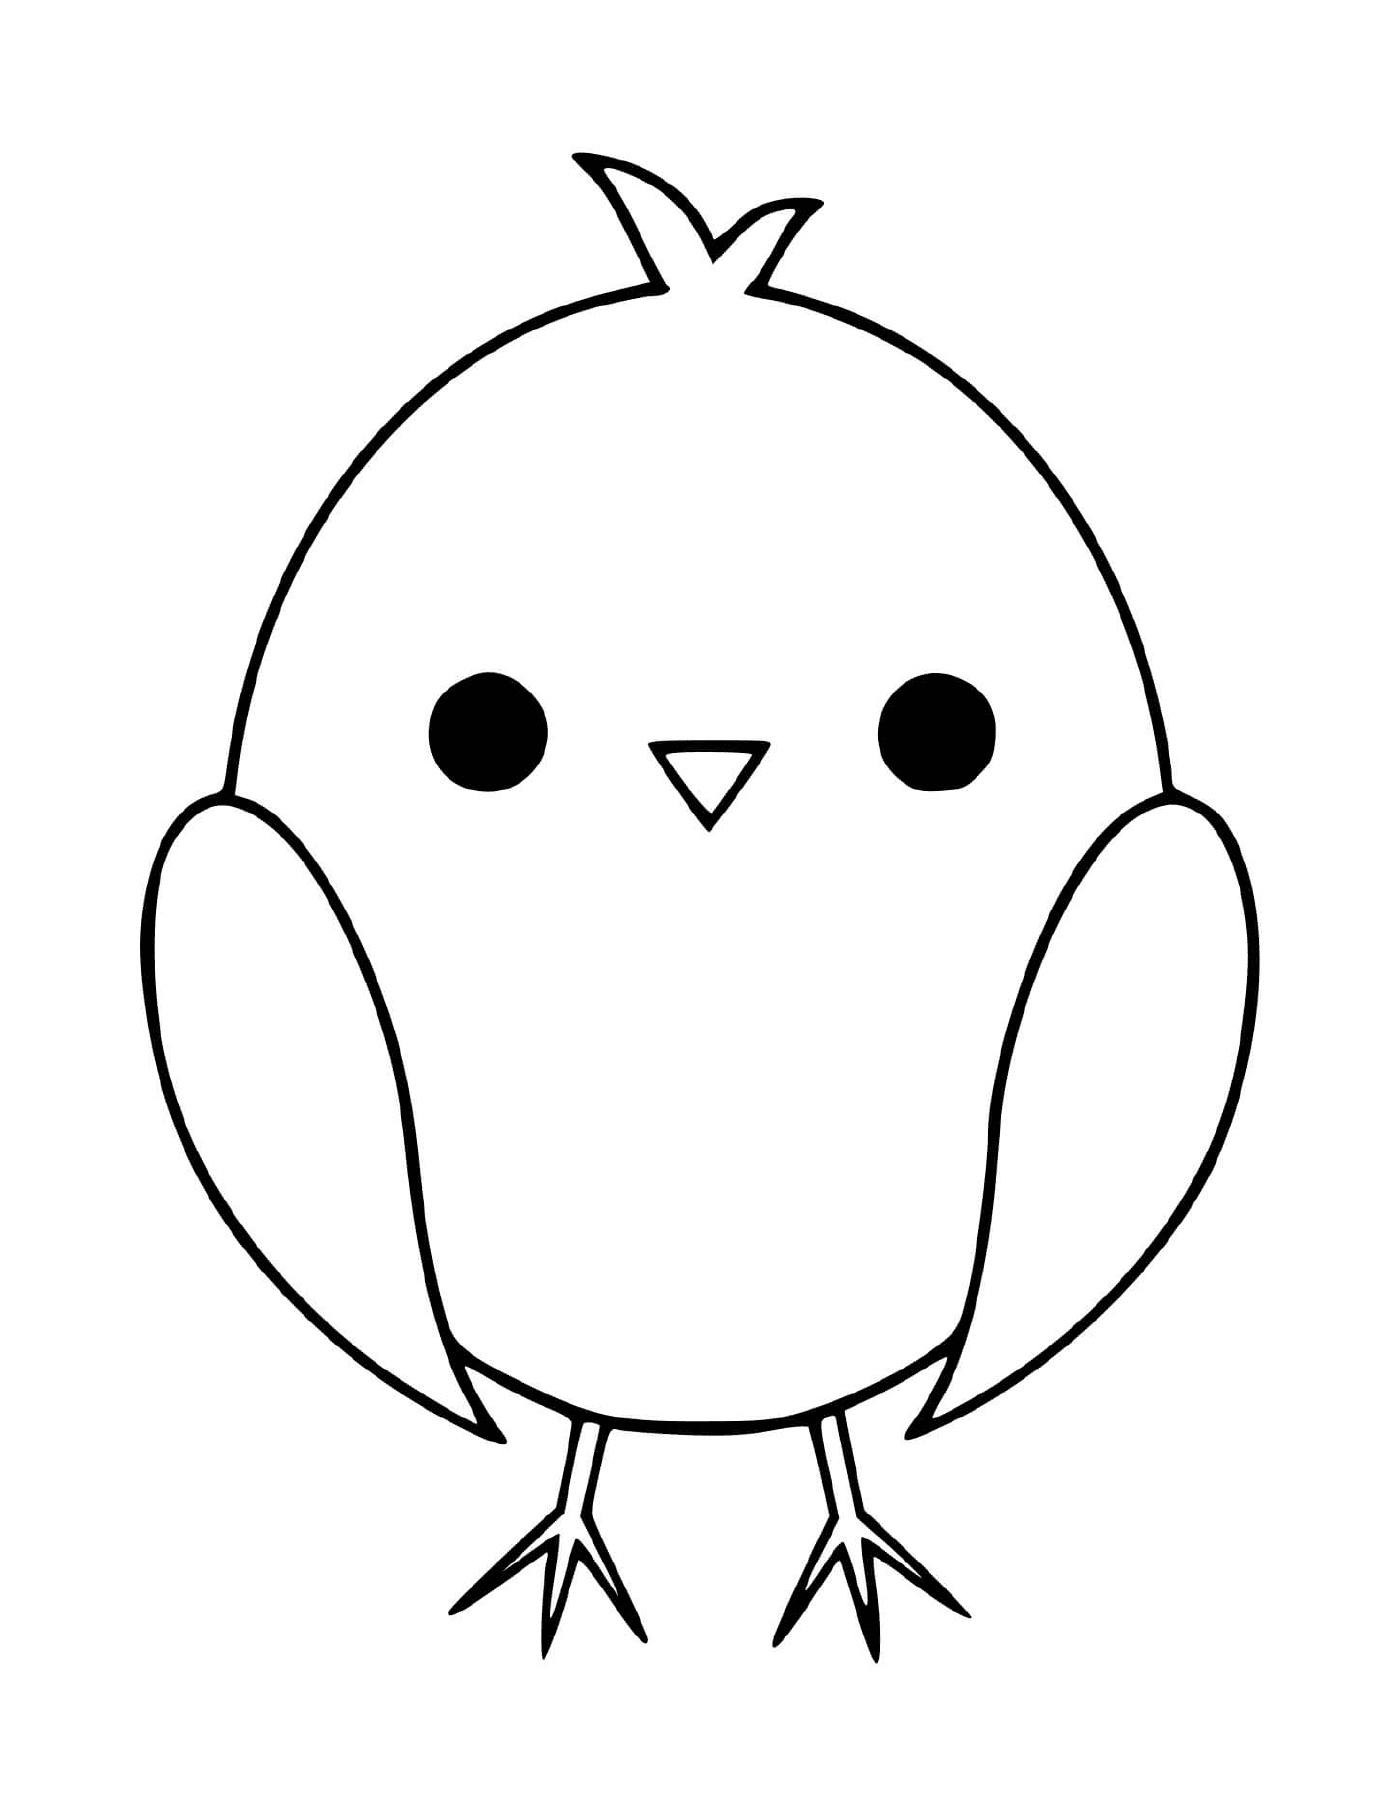  simple bird for the little ones 